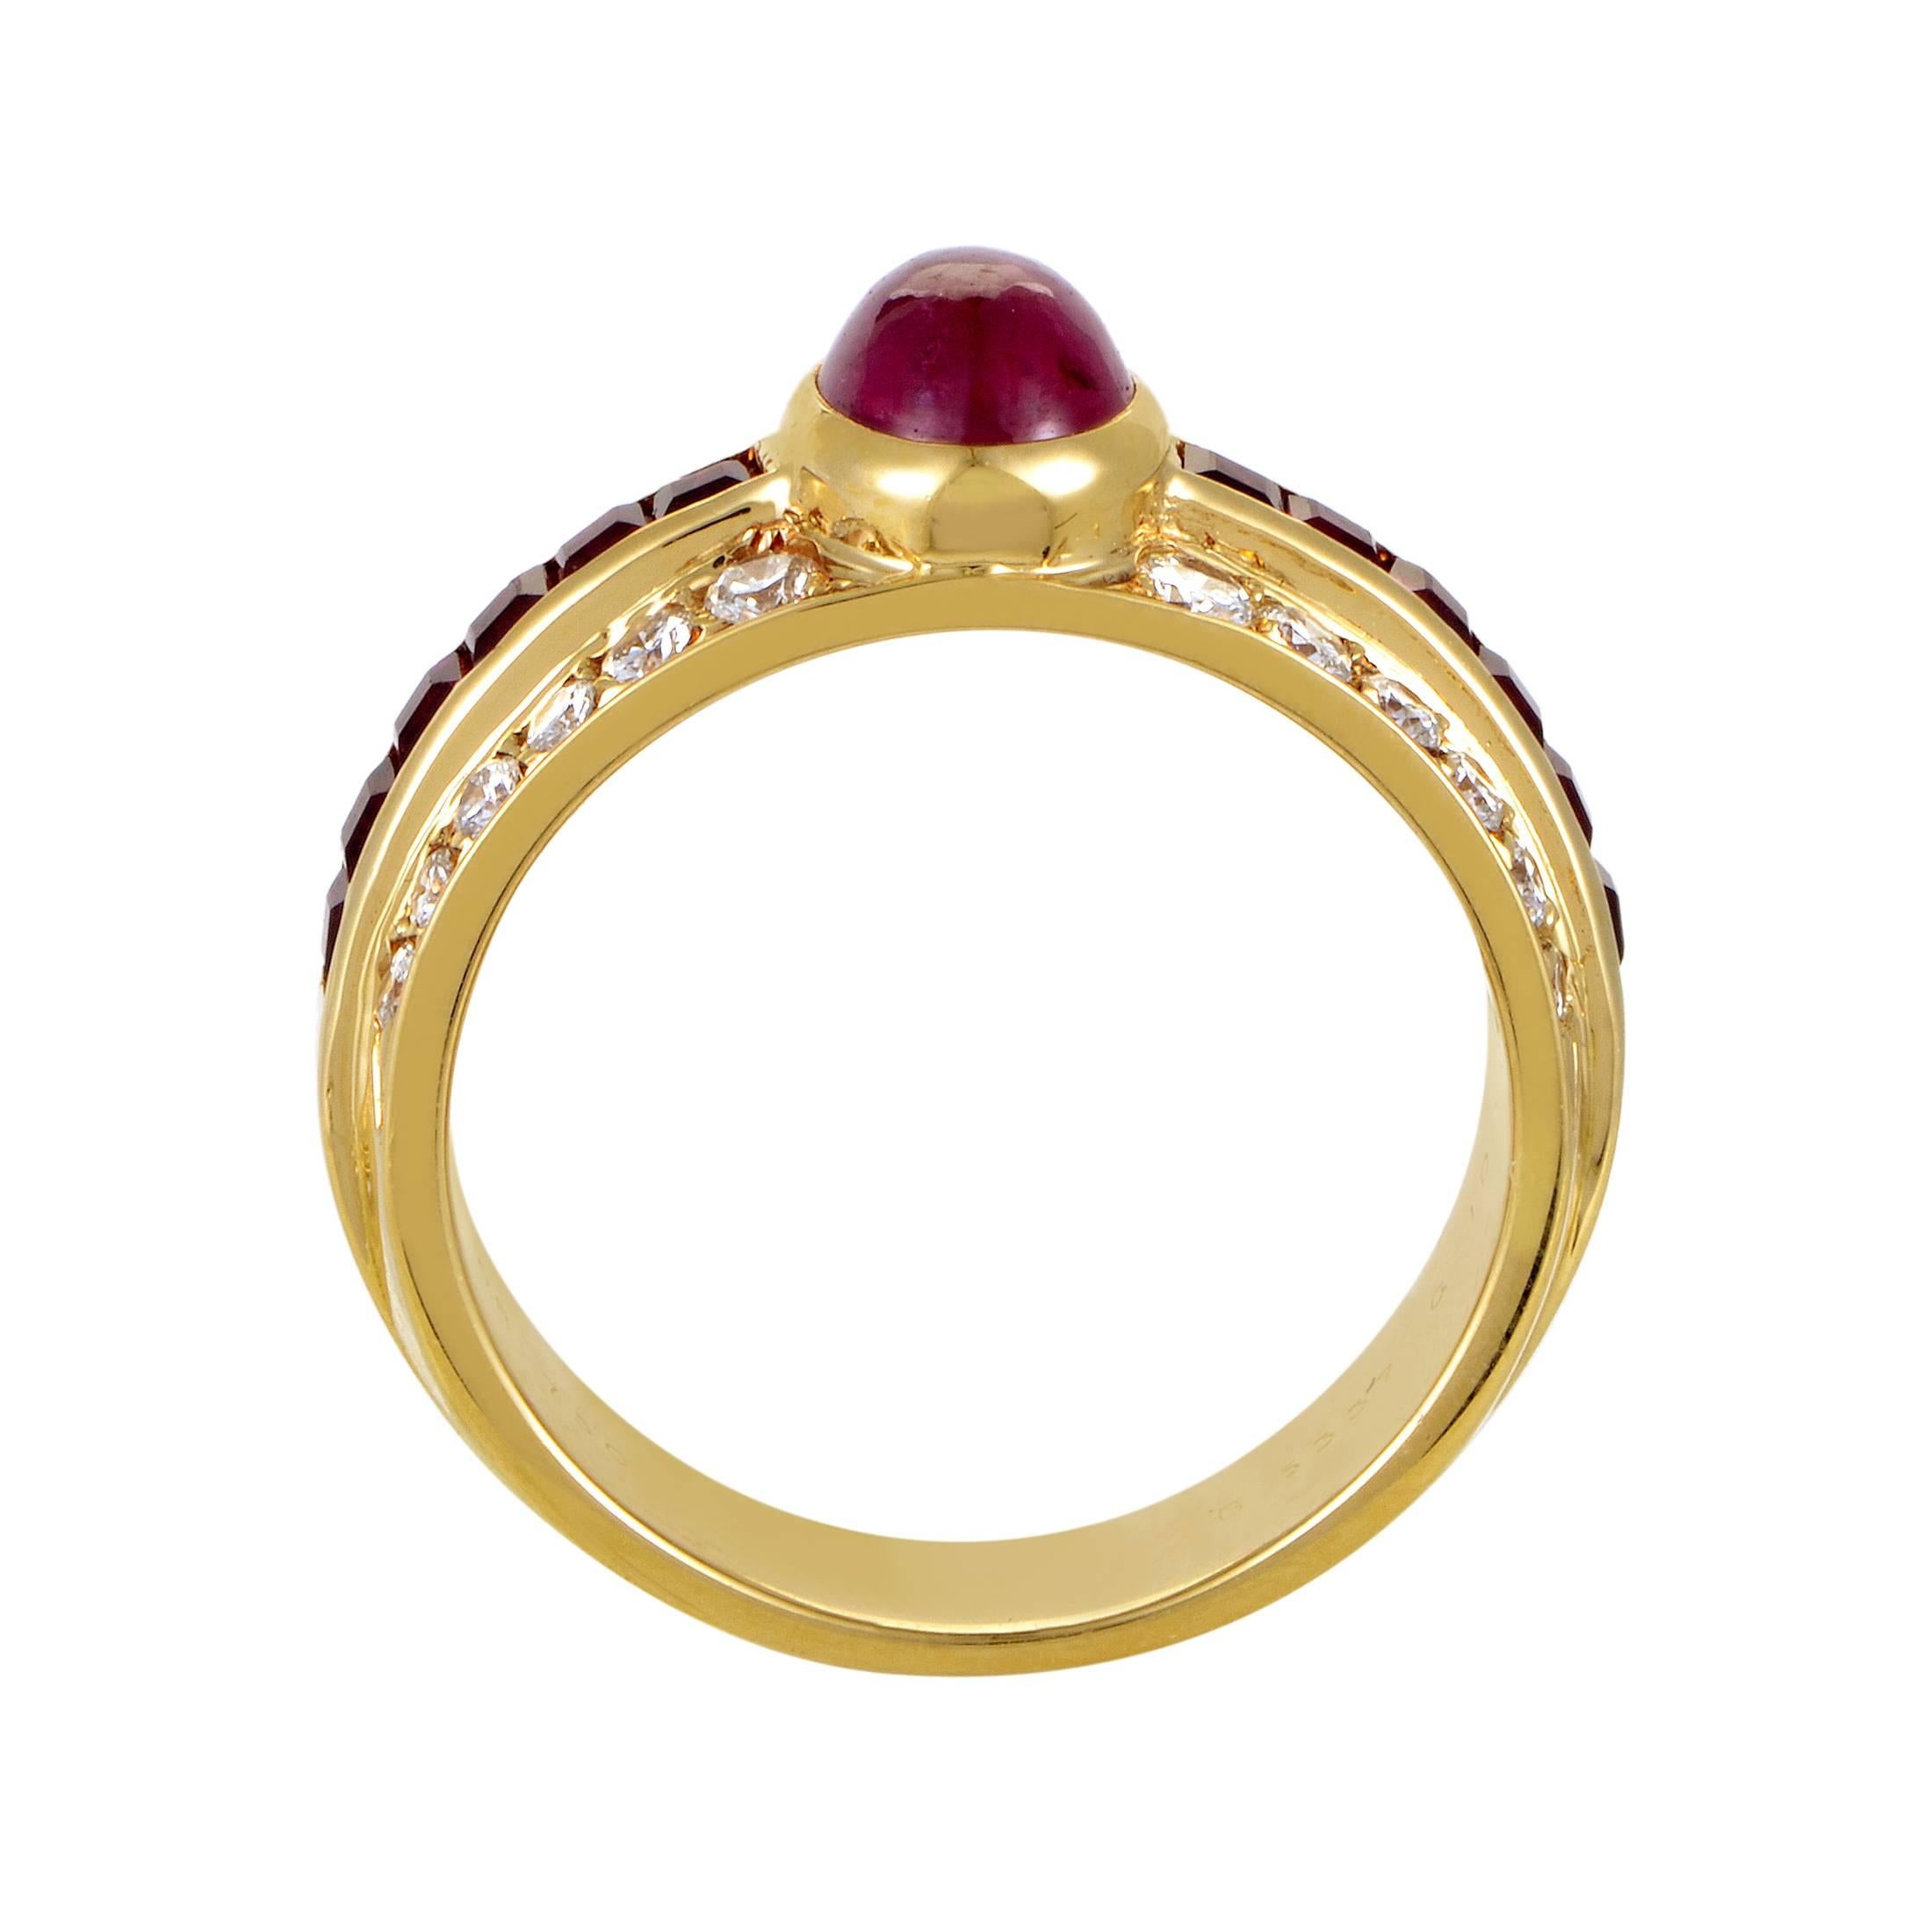 This classic design from Van Cleef & Arpels is absolutely divine. The ring is made of 18K yellow gold, and boasts a gorgeous ruby cabochon main stone, as well as ruby baguettes set within the shanks. Lastly, the shanks are also set with .65ct of